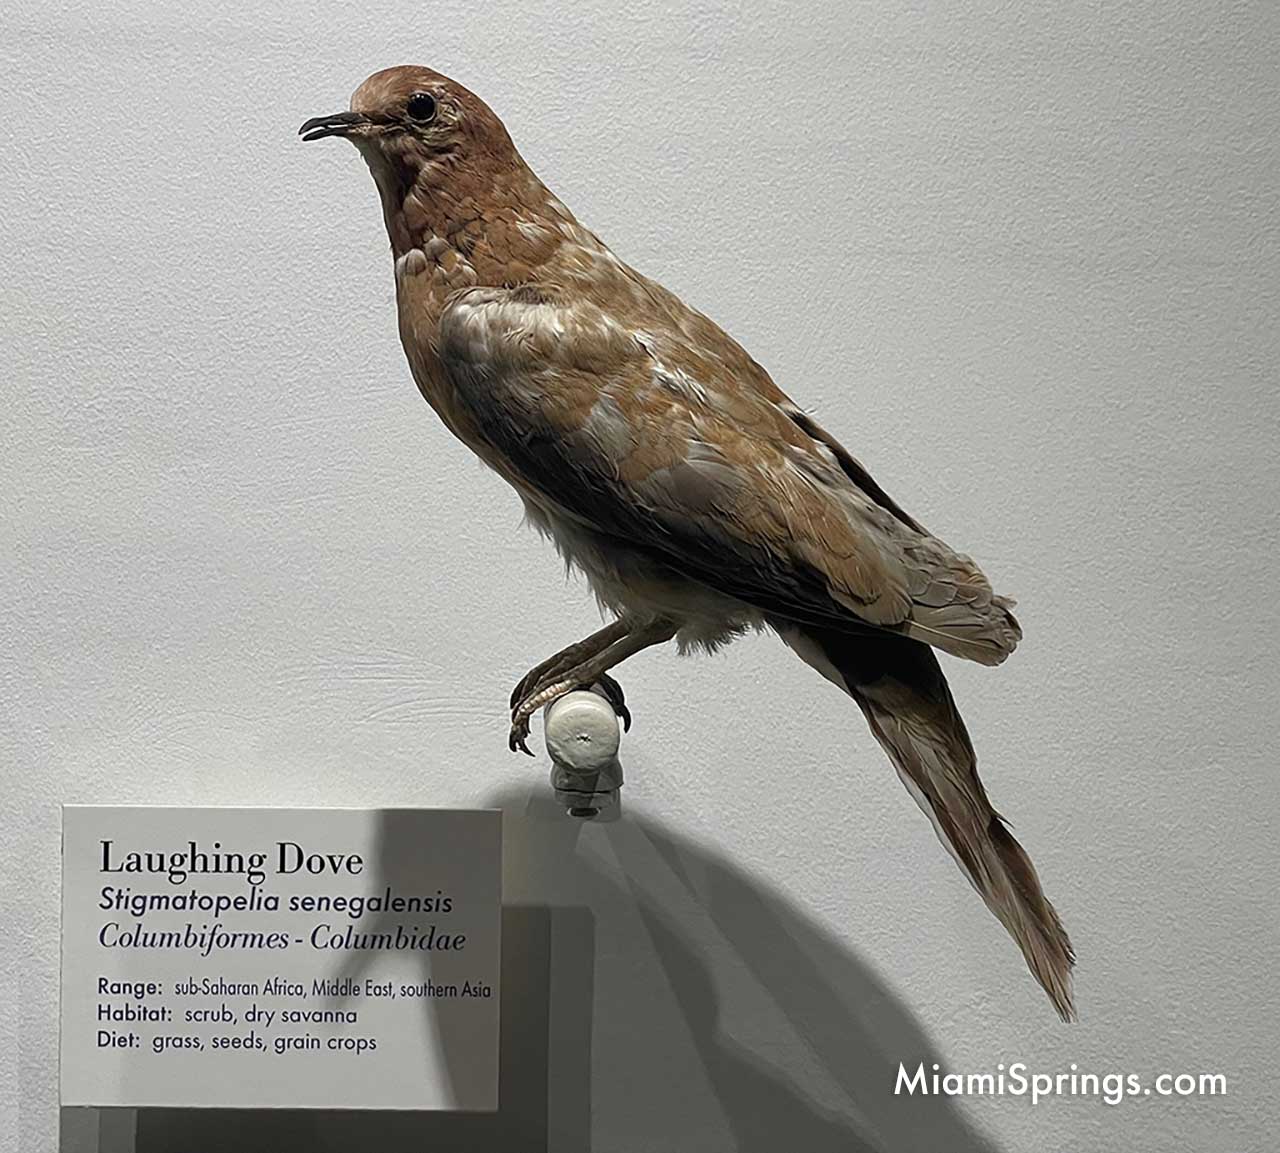 Laughing Dove displayed at the Harvard Museum of Natural History